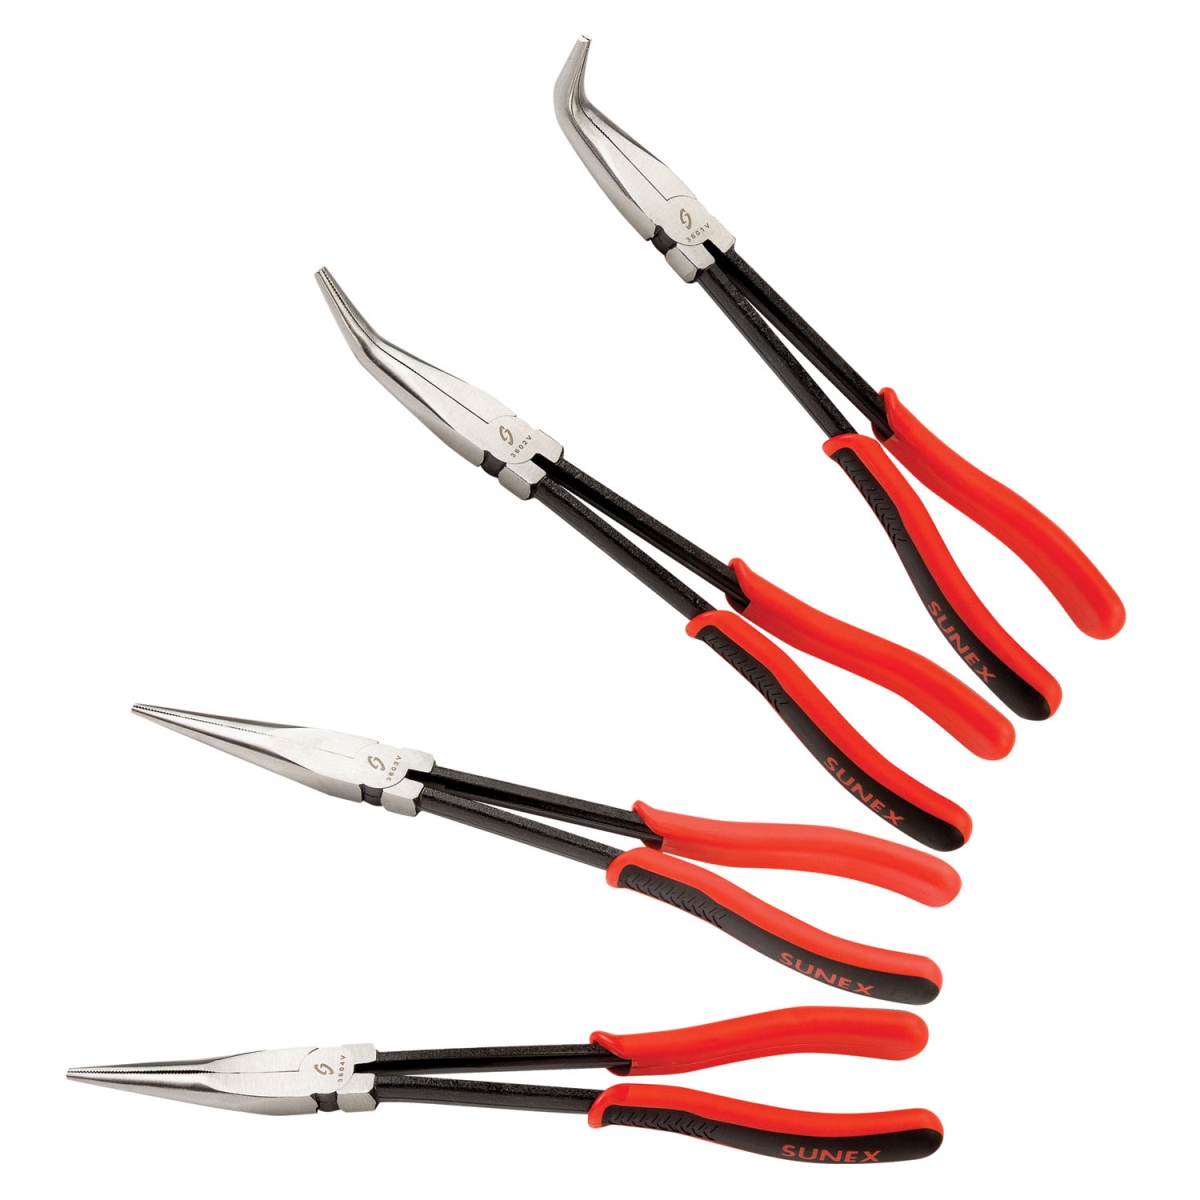 3600v 11 In. Needle Nose Pliers Set, 4 Piece